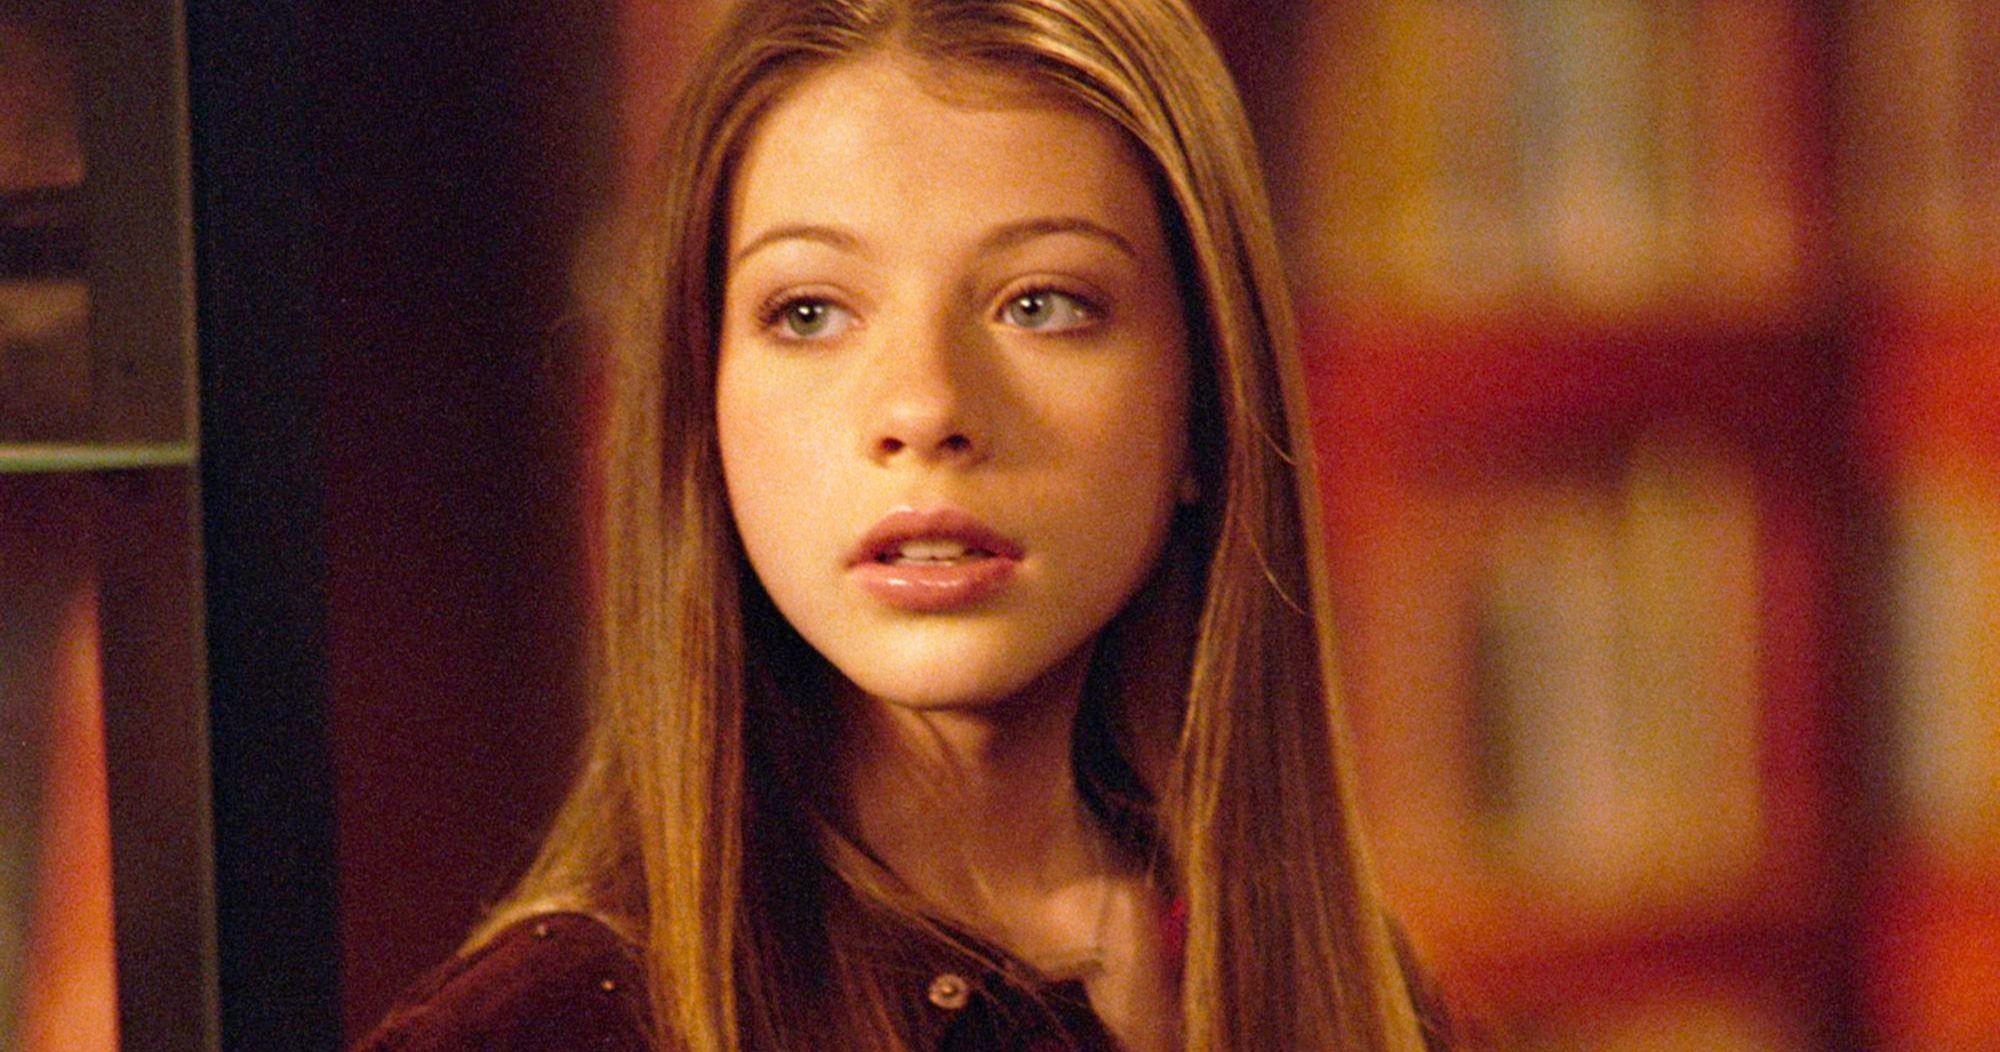 Michelle Trachtenberg Also Accuses Joss Whedon of Inappropriate Behavior on Buffy Set